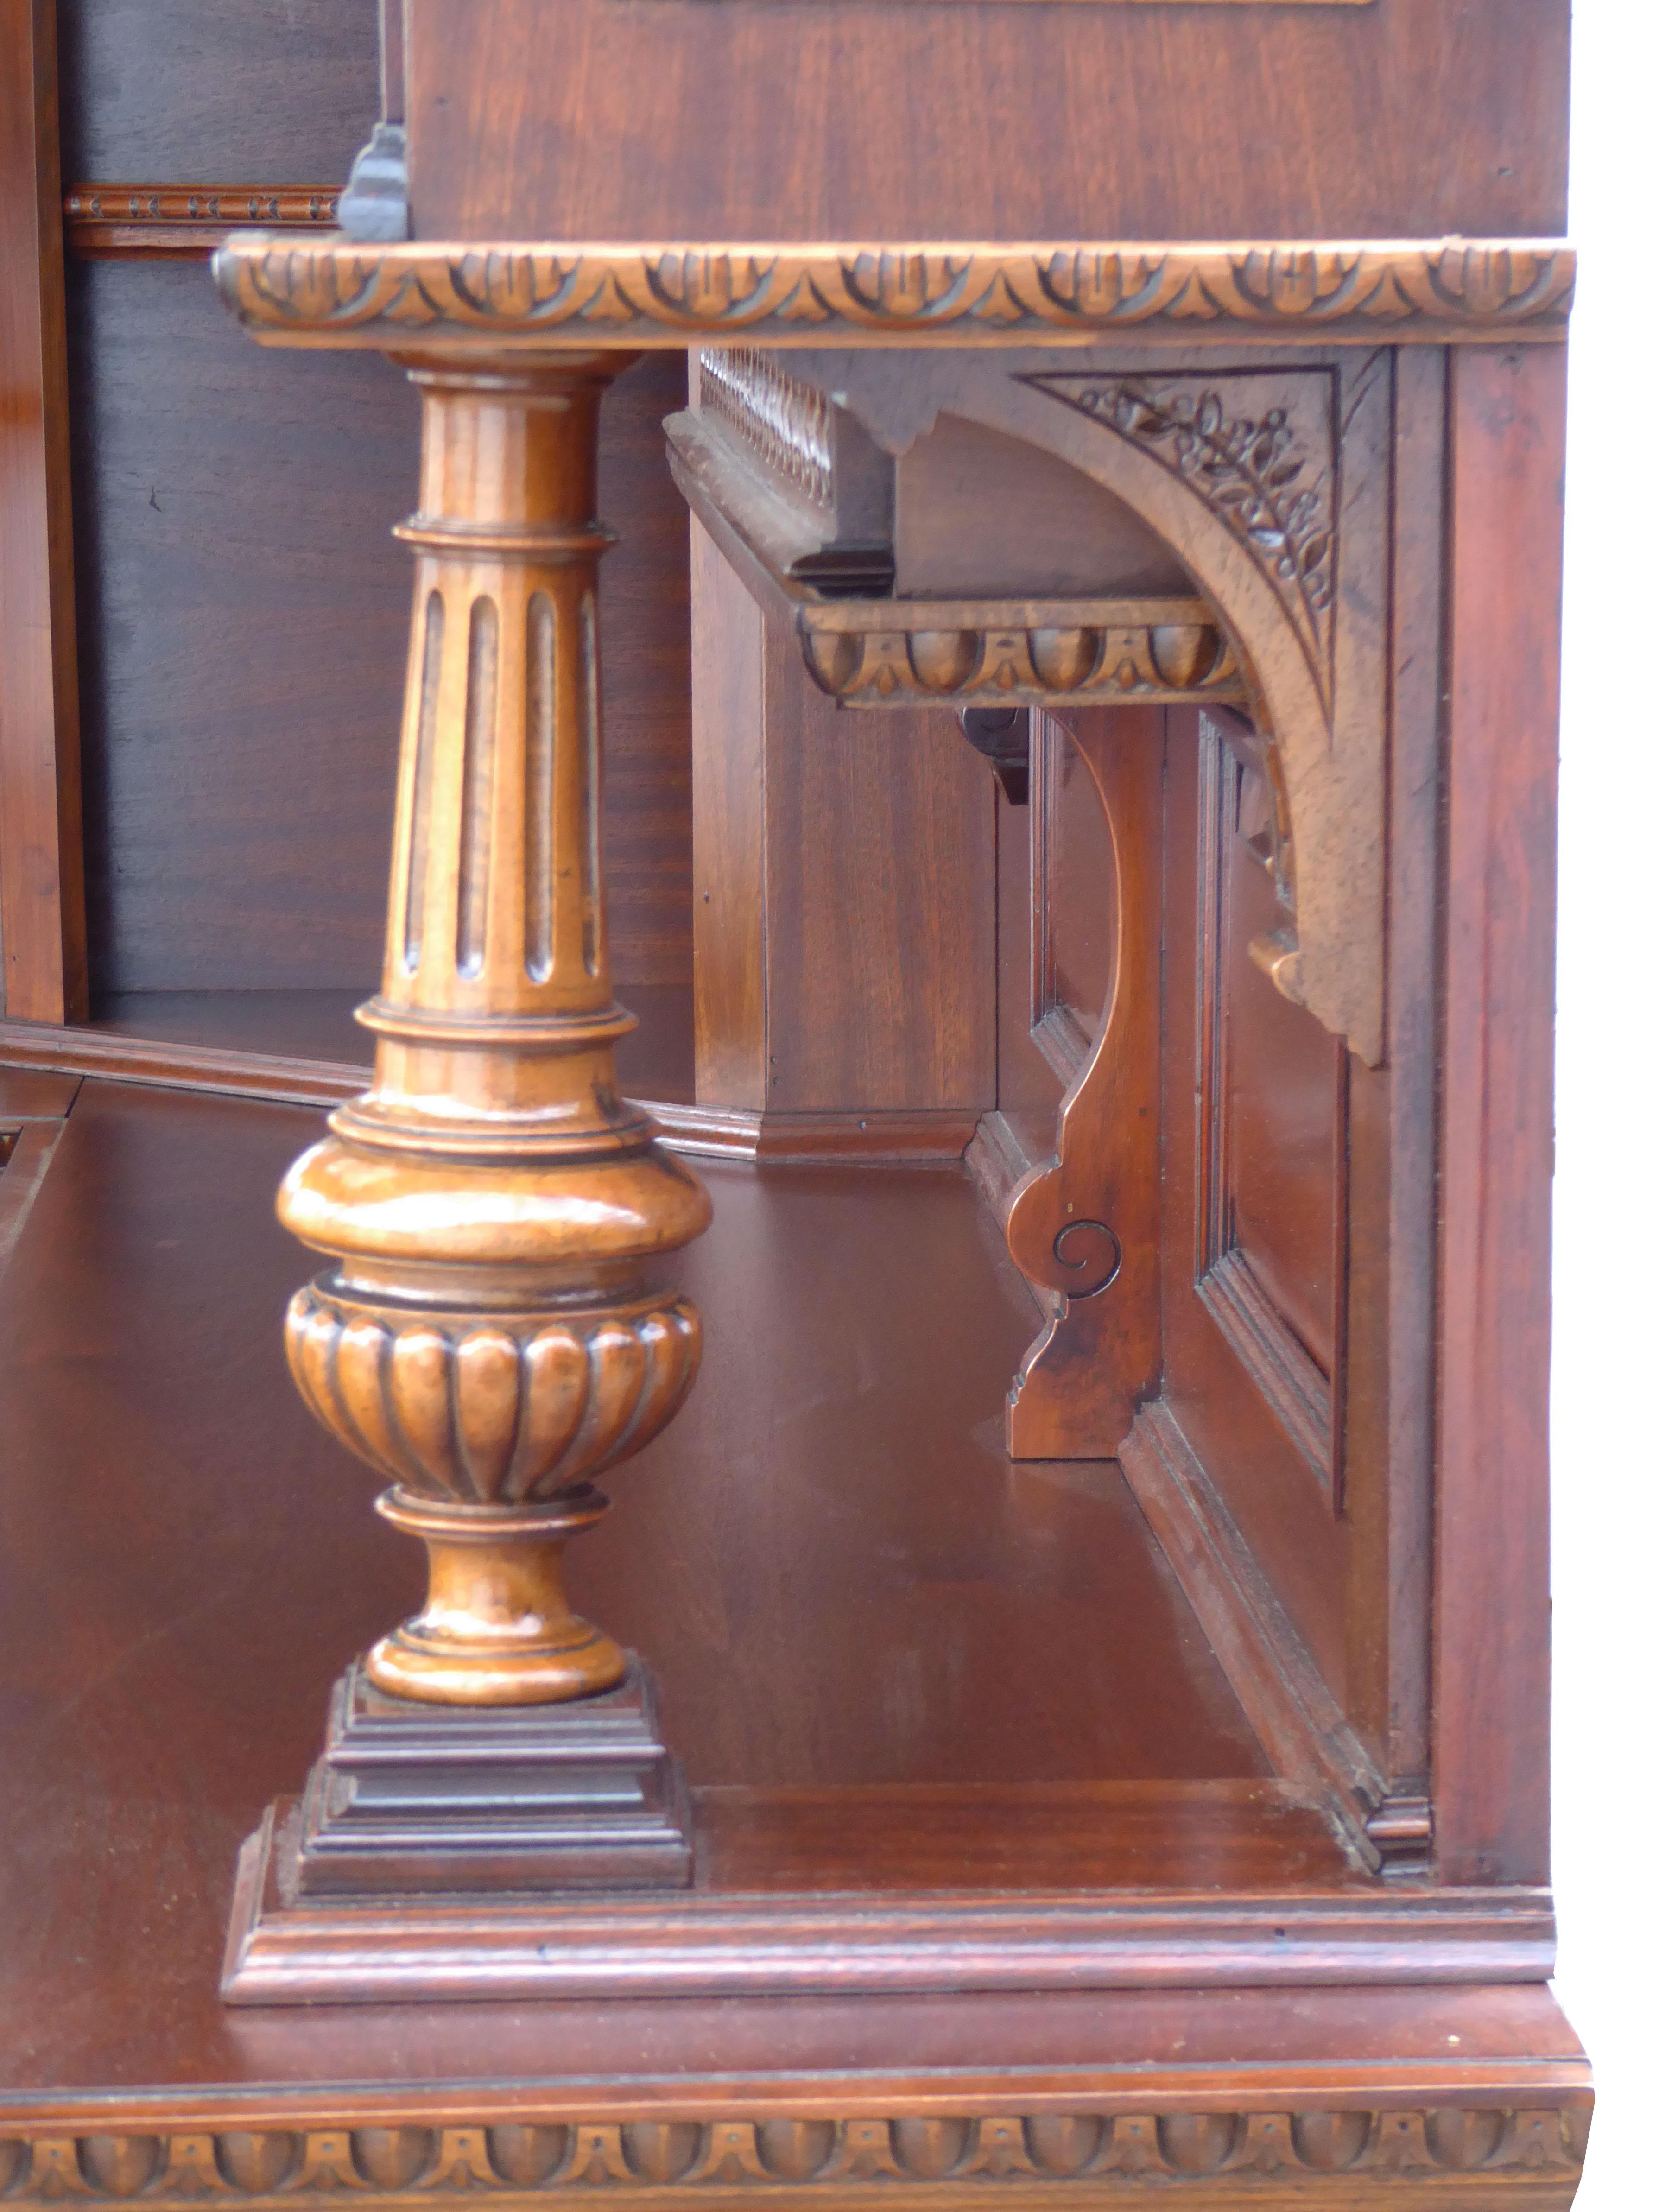 For sale is a good quality English mahogany and walnut carved canted corner bar. The bar has a decorative canopy with an antique stained glass ceiling, with arched edges decorated with carved corbels. At the front there are two columns to support